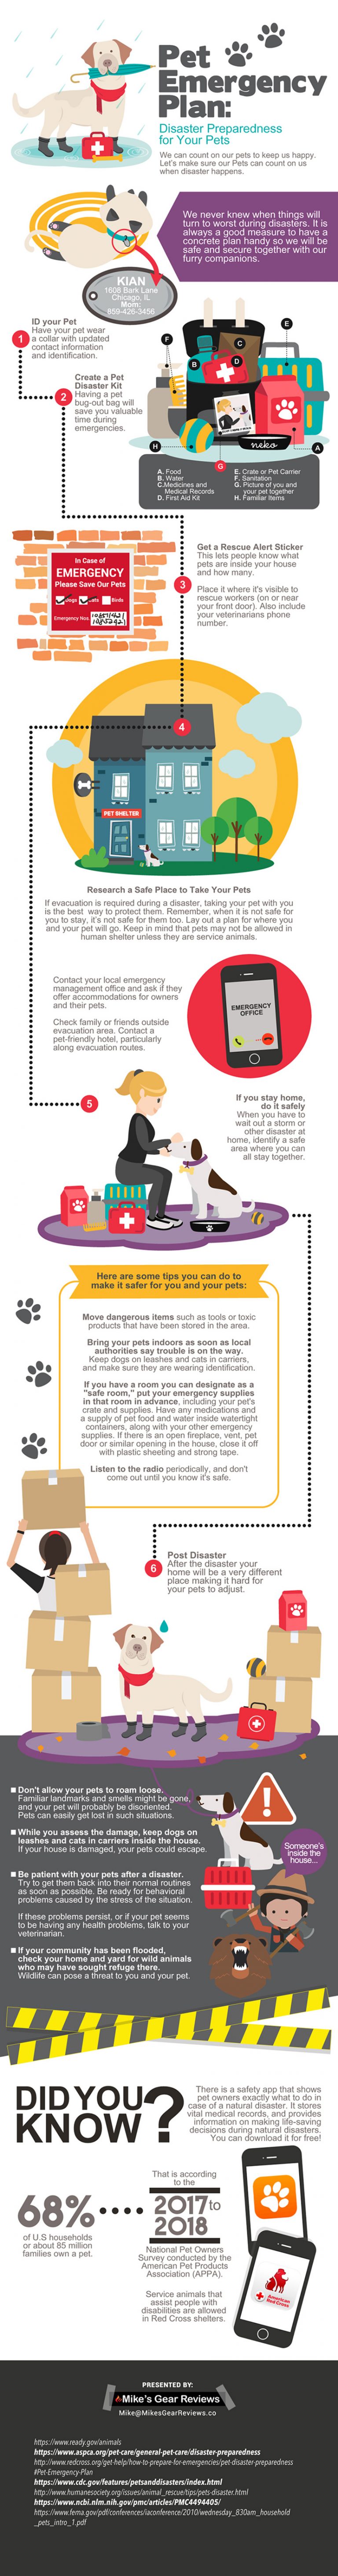 Pet Emergency Plan Disaster Preparedness for Your Pets Infographic 